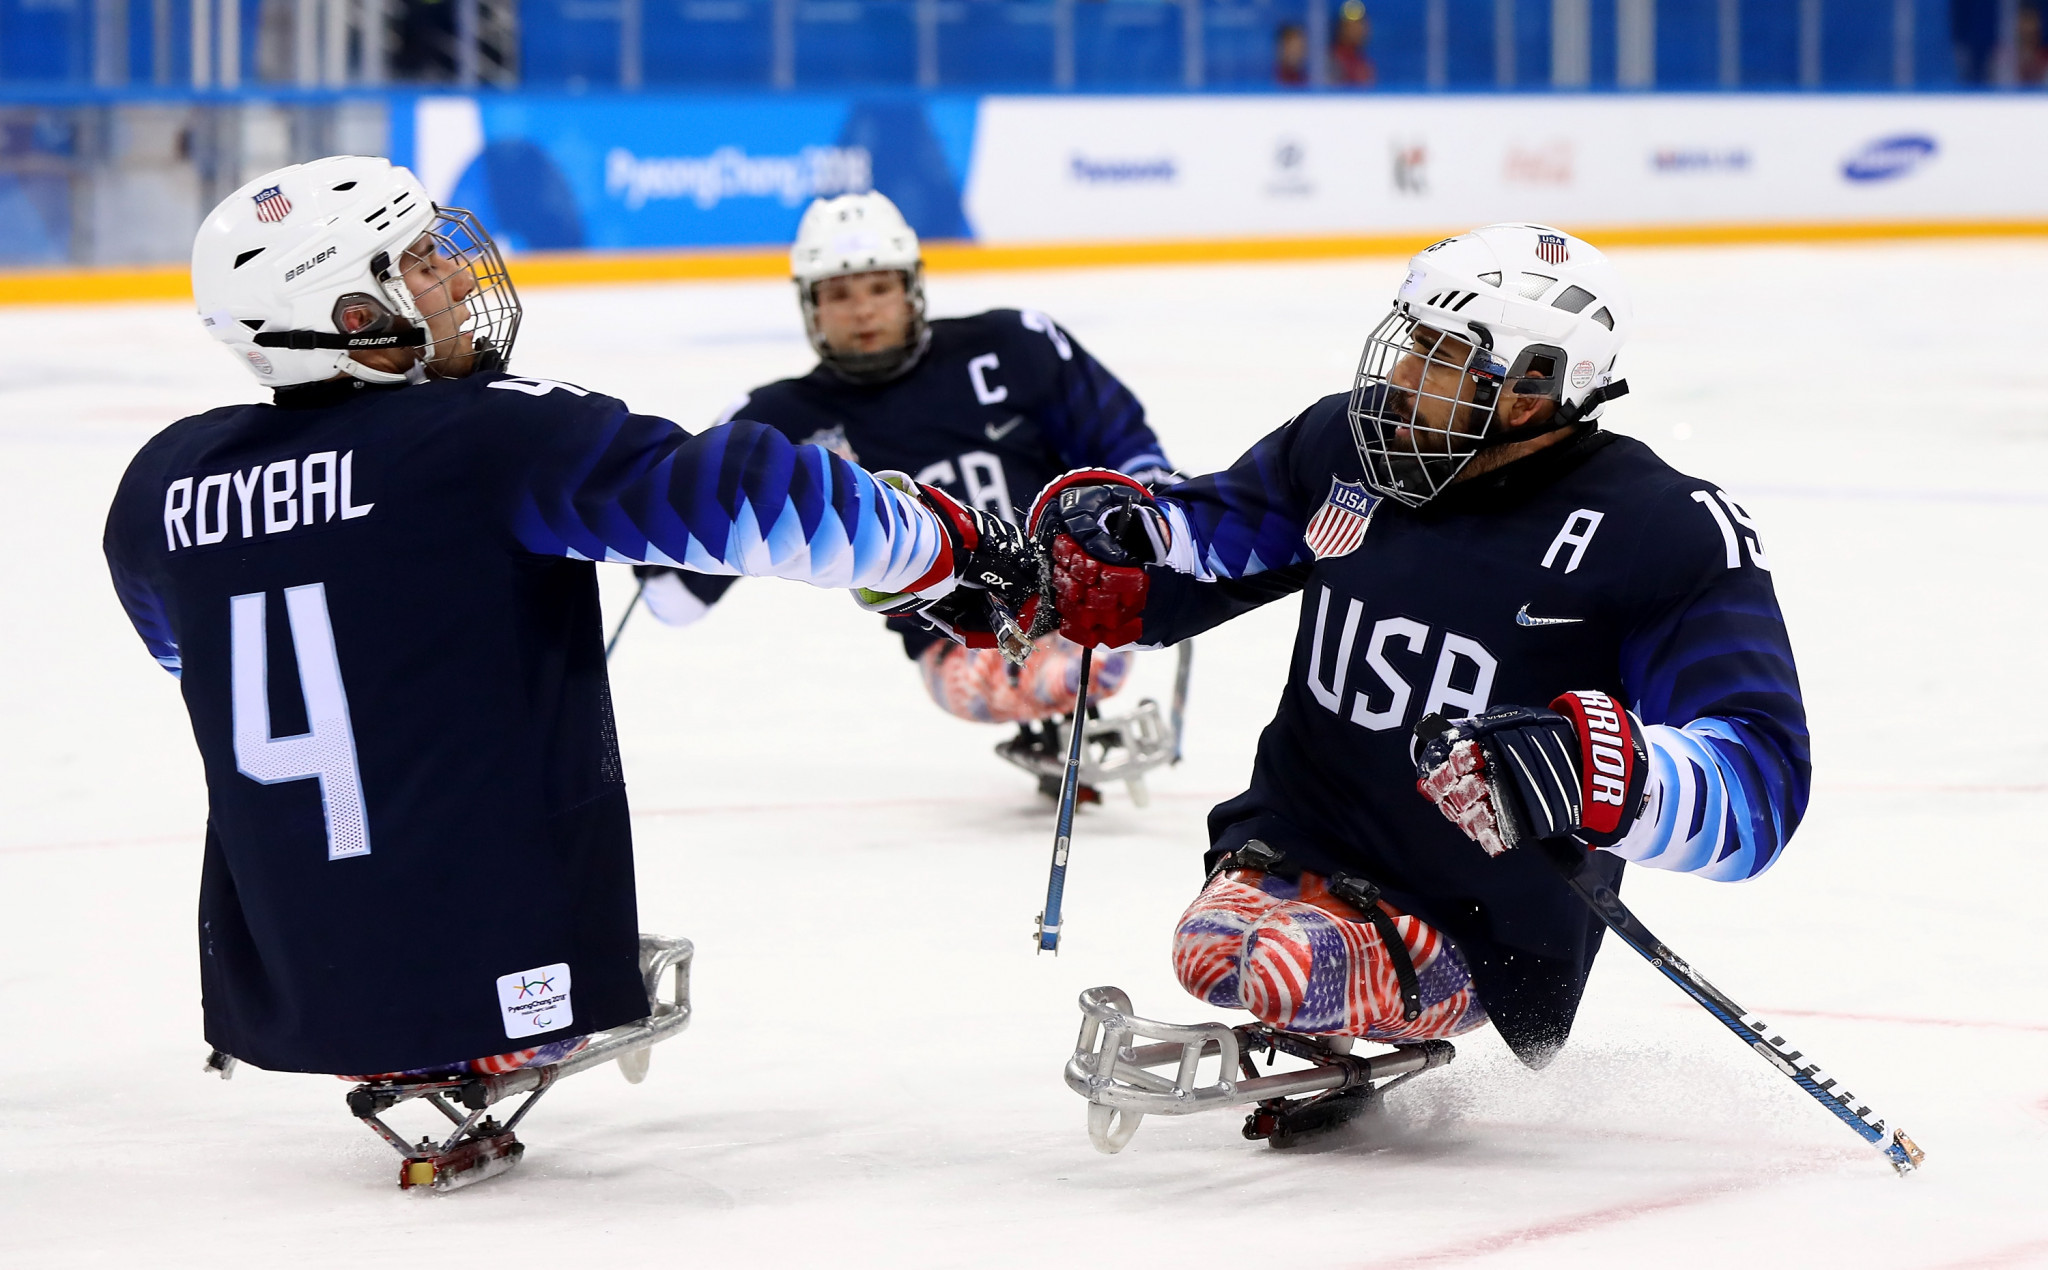 The US recorded a comfortable 10-1 victory over Italy ©Getty Images